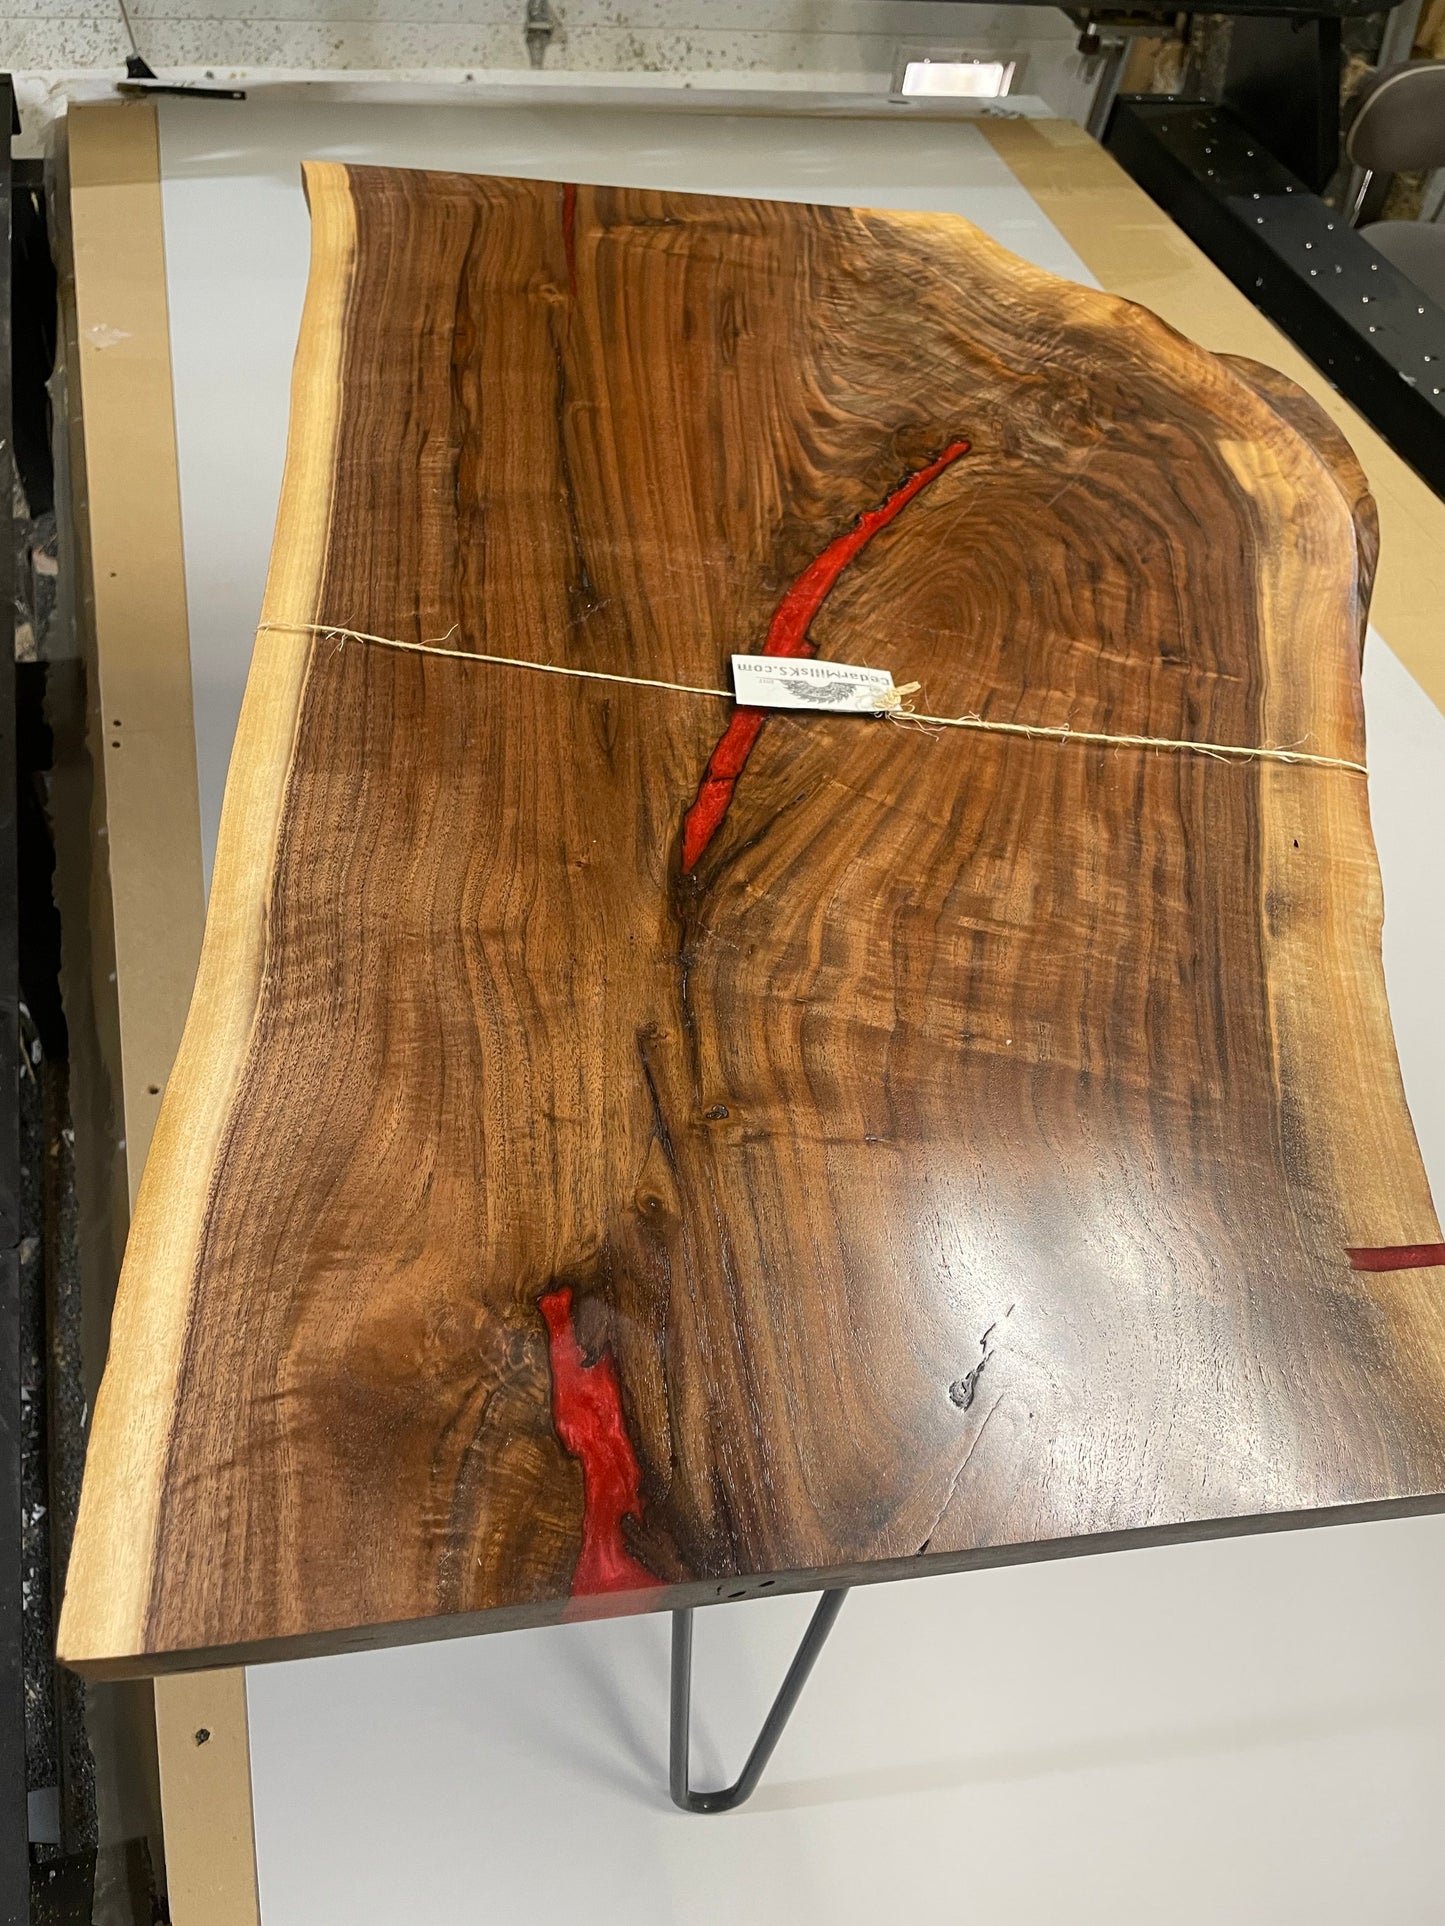 Walnut coffee table with red fills